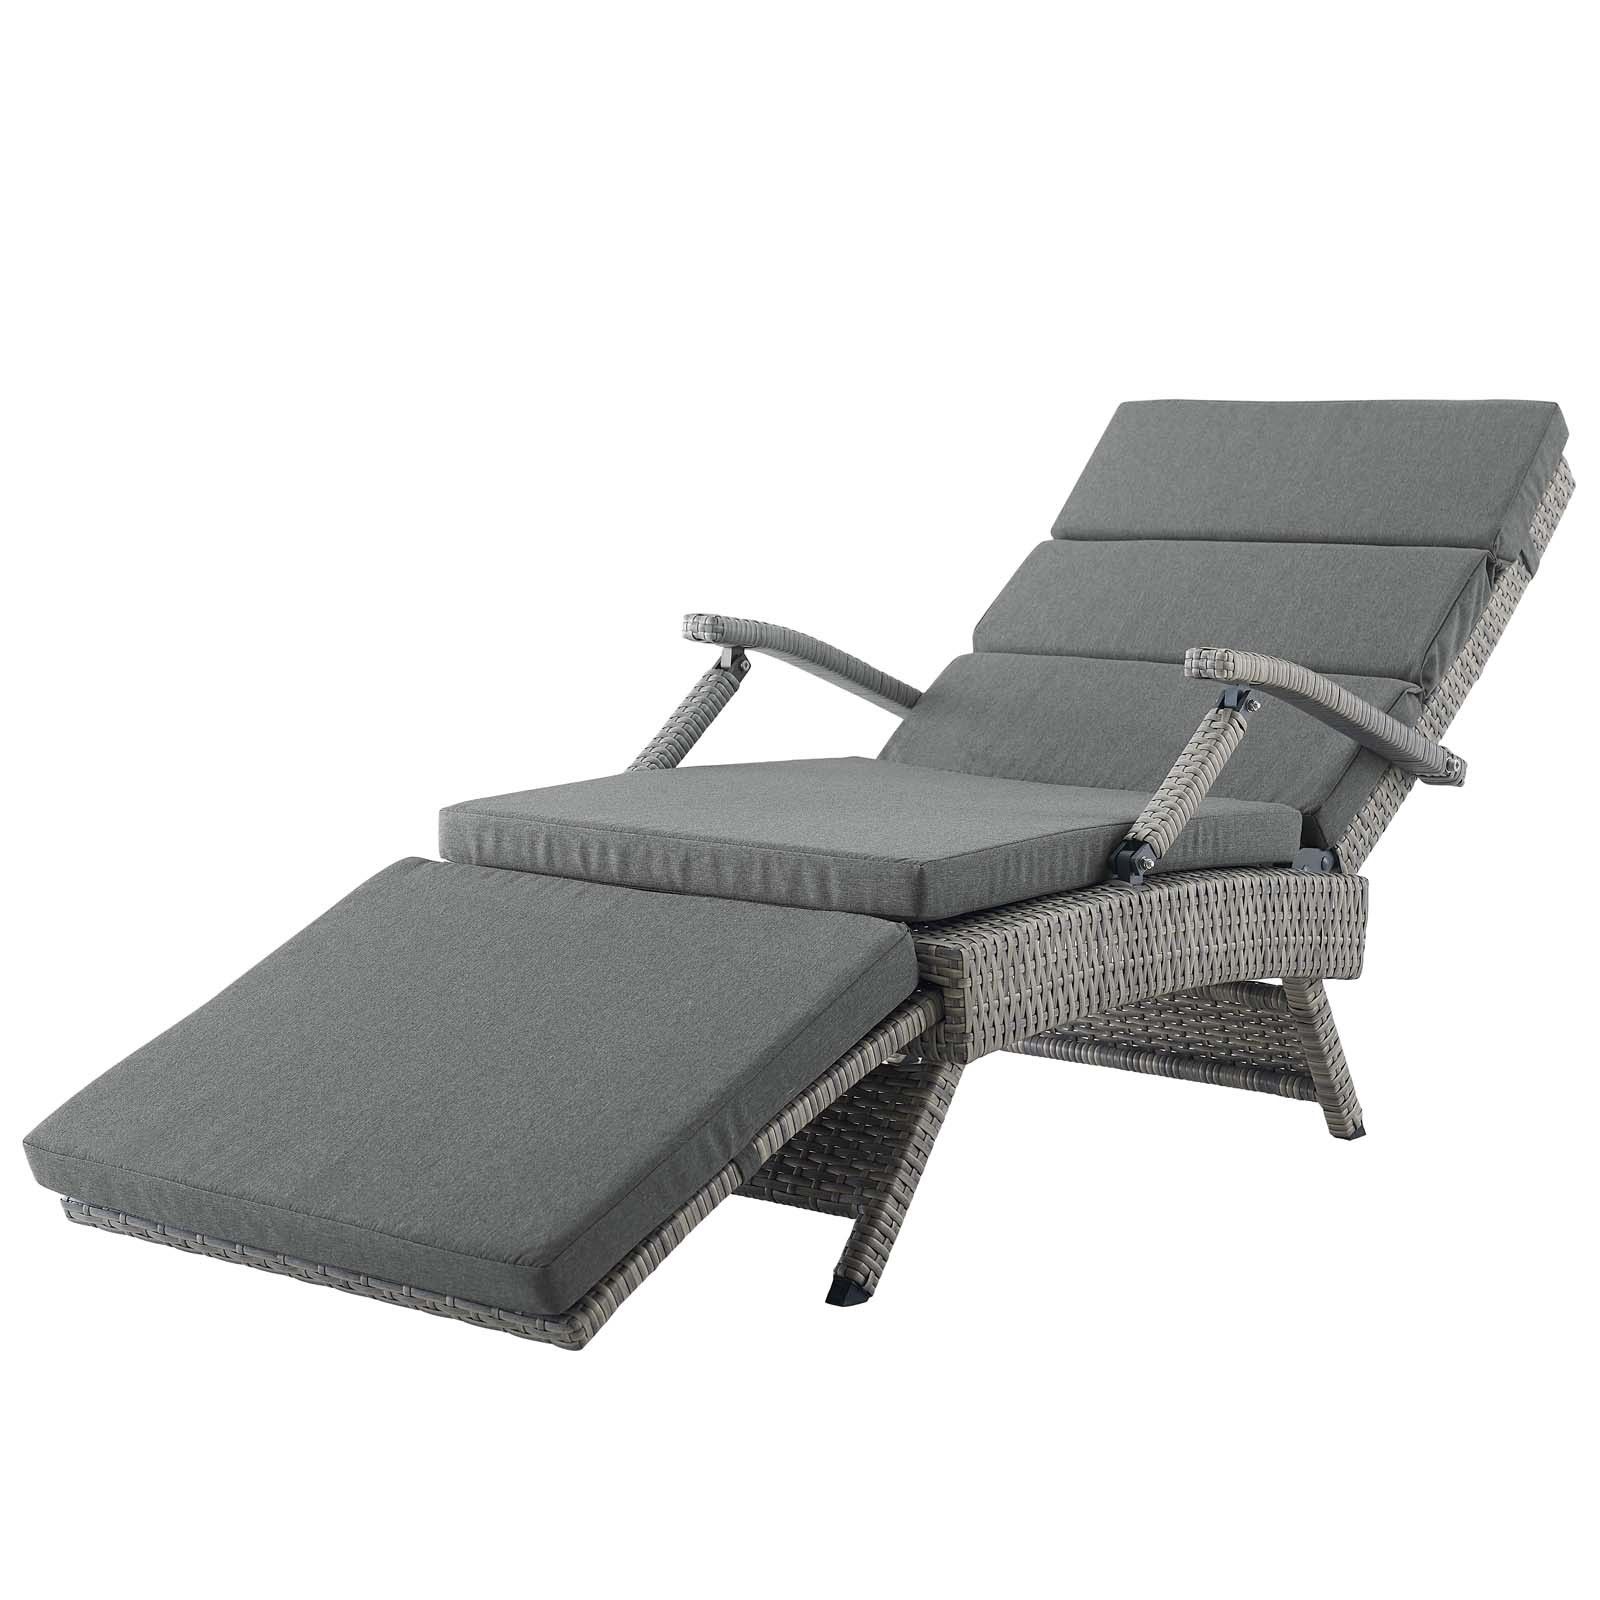 Well Known Envisage Chaise Outdoor Patio Wicker Rattan Lounge Chairs Intended For Modterior :: Outdoor :: Lounge Chairs :: Envisage Chaise (View 3 of 25)